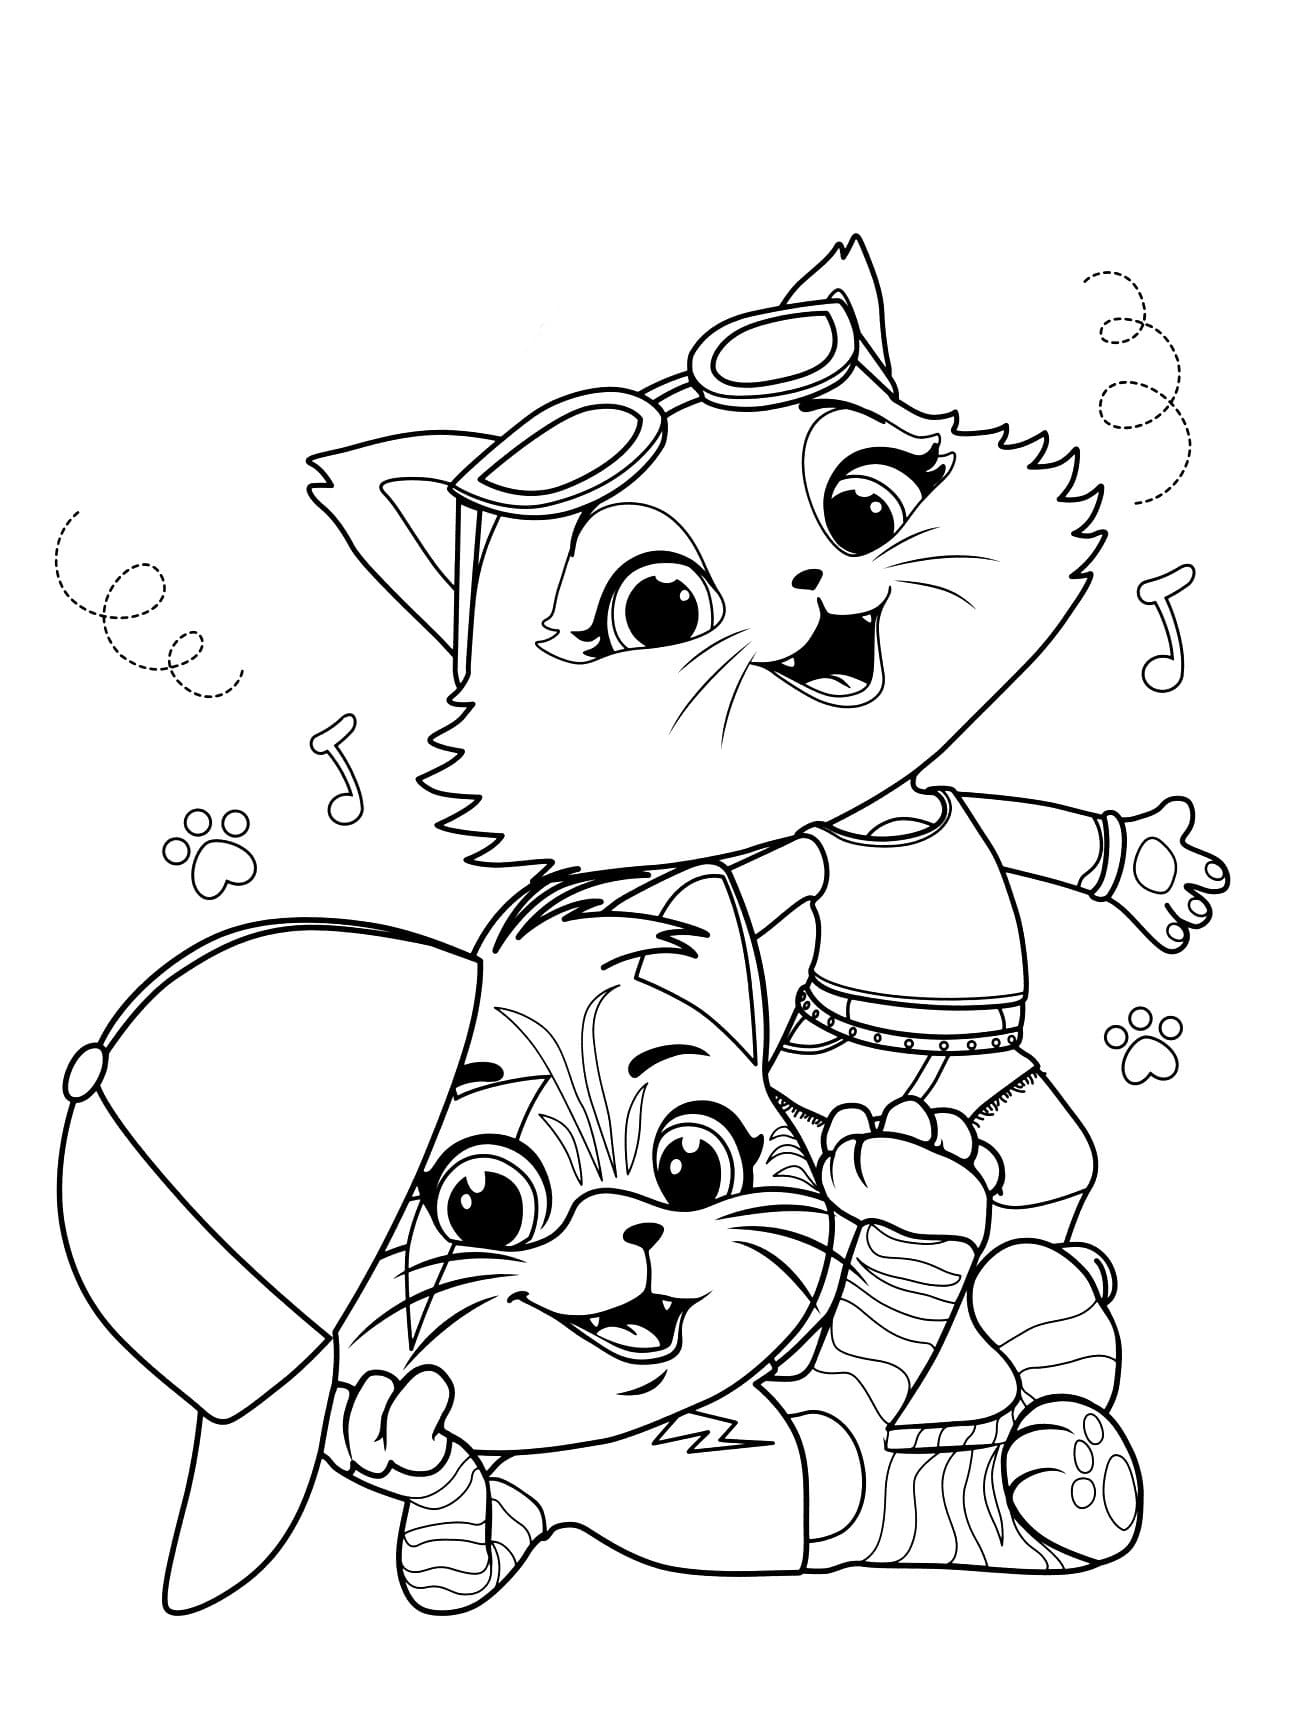 44 Cats Cat With Lightning Coloring Page concernant Chat Coloriage À Imprimer